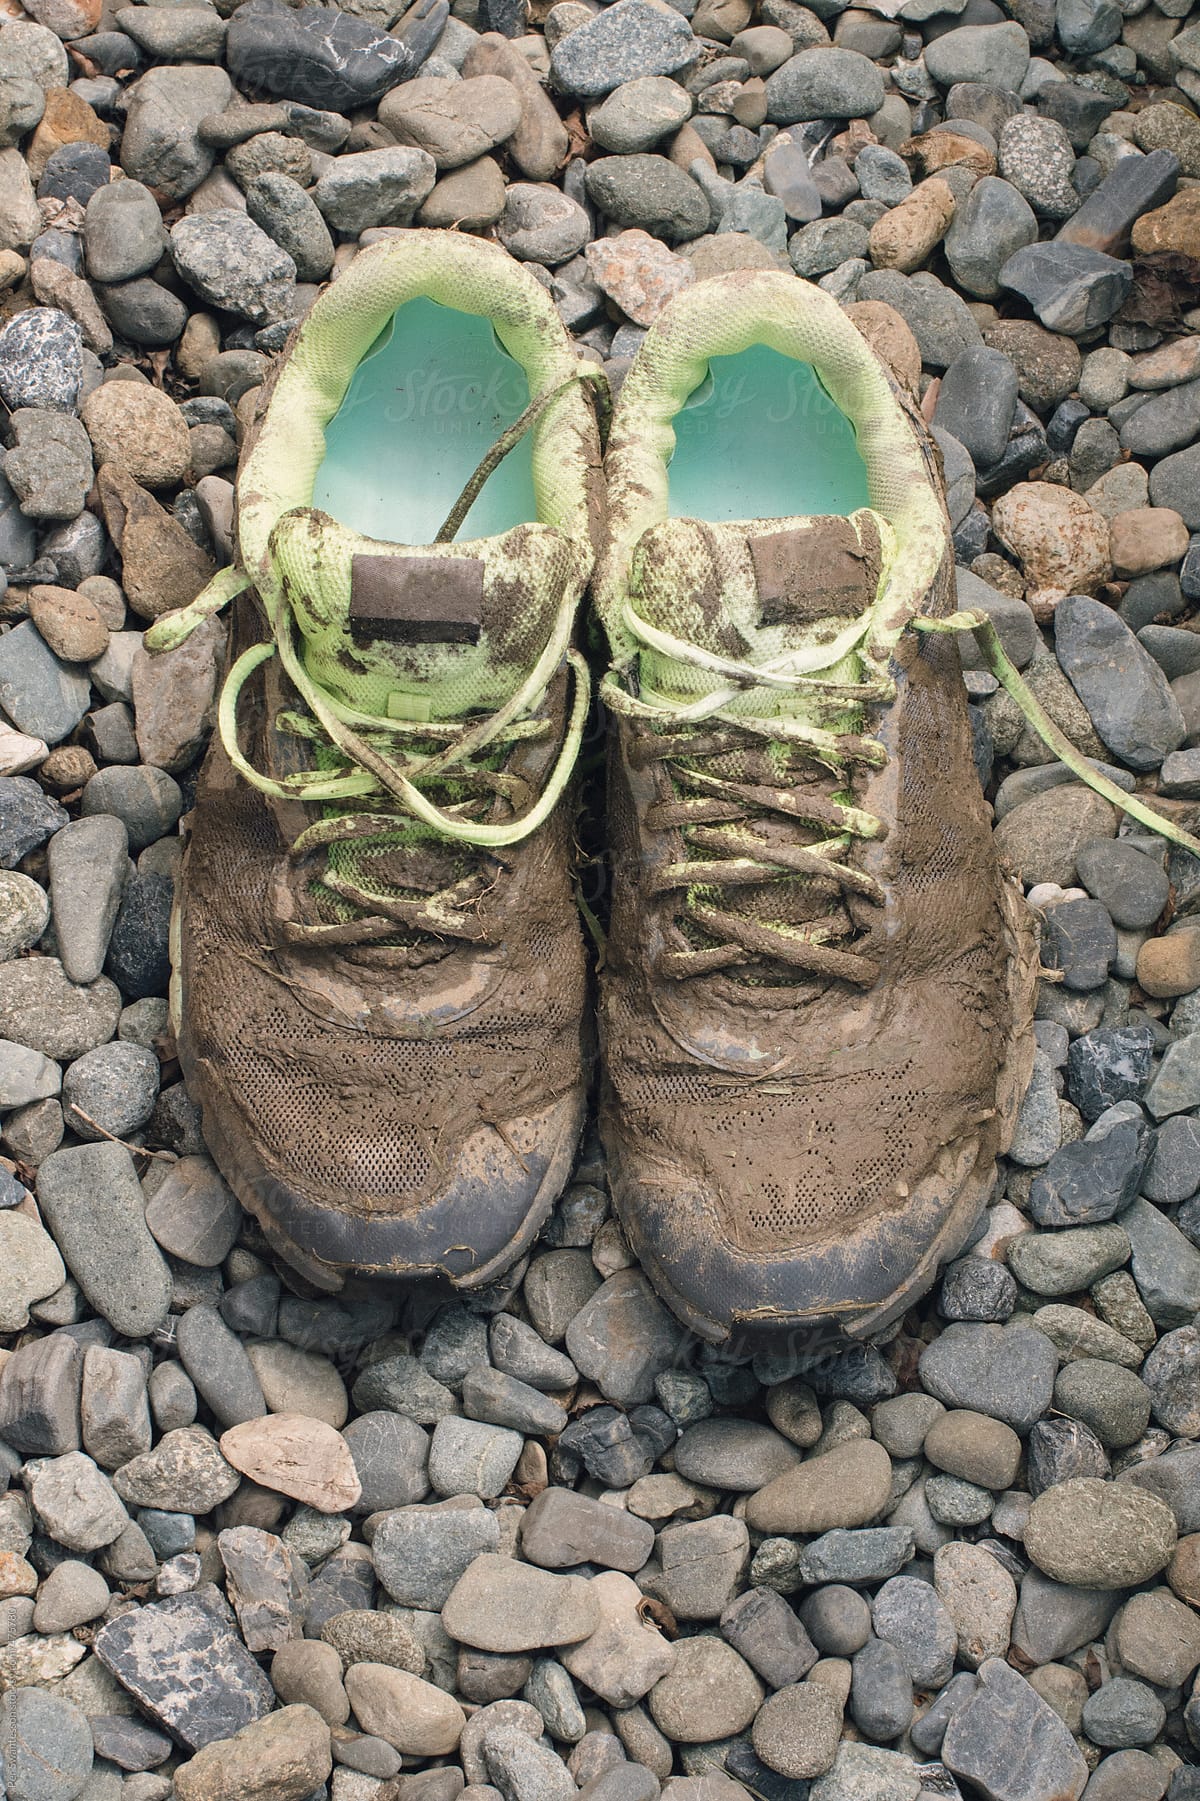 Pair of very dirty runners shoes after exercise